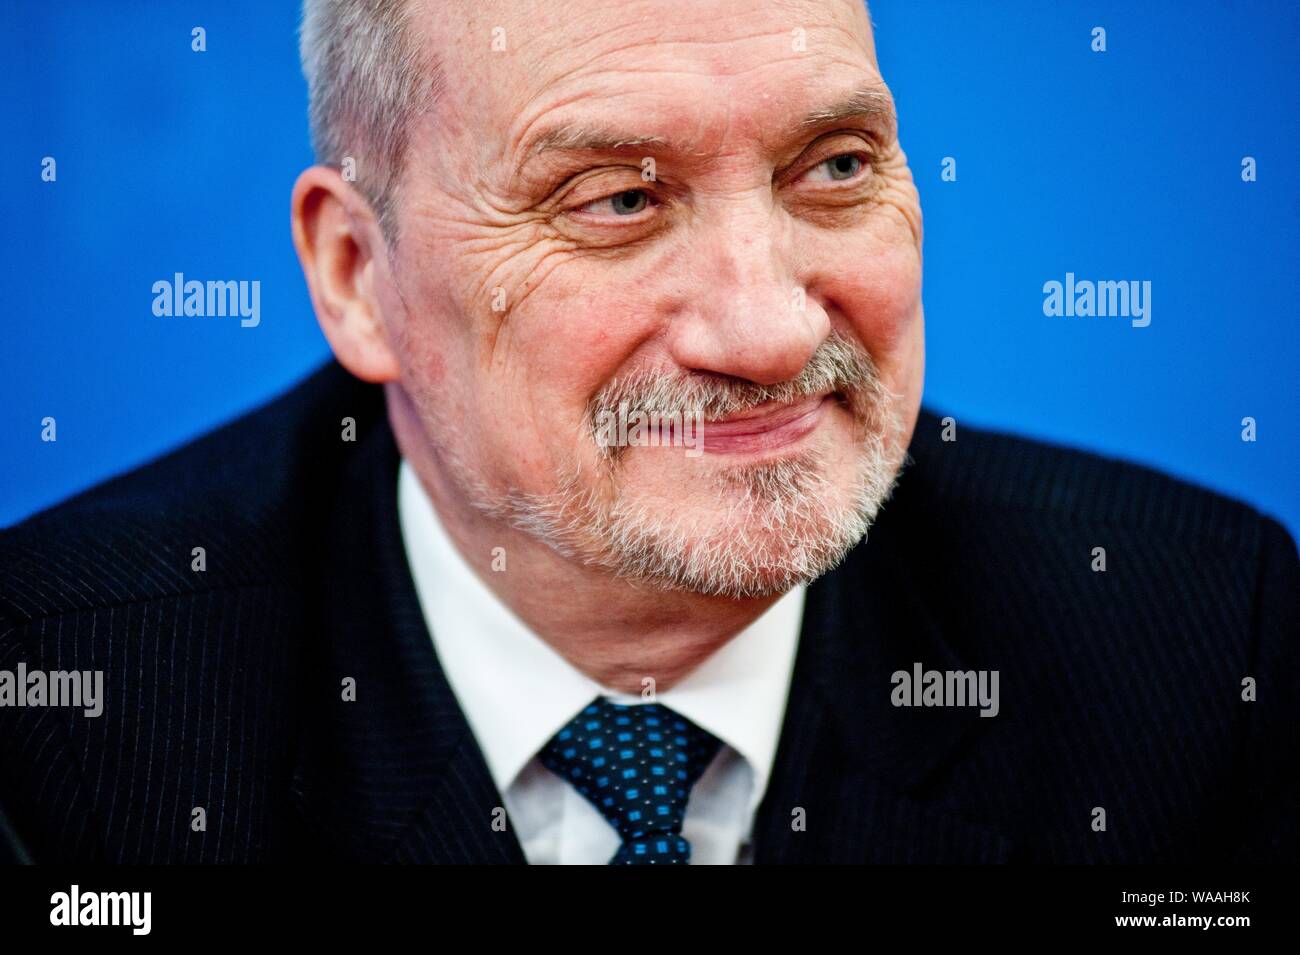 Antoni Macierewicz - former Minister of National Defence for Poland Stock Photo